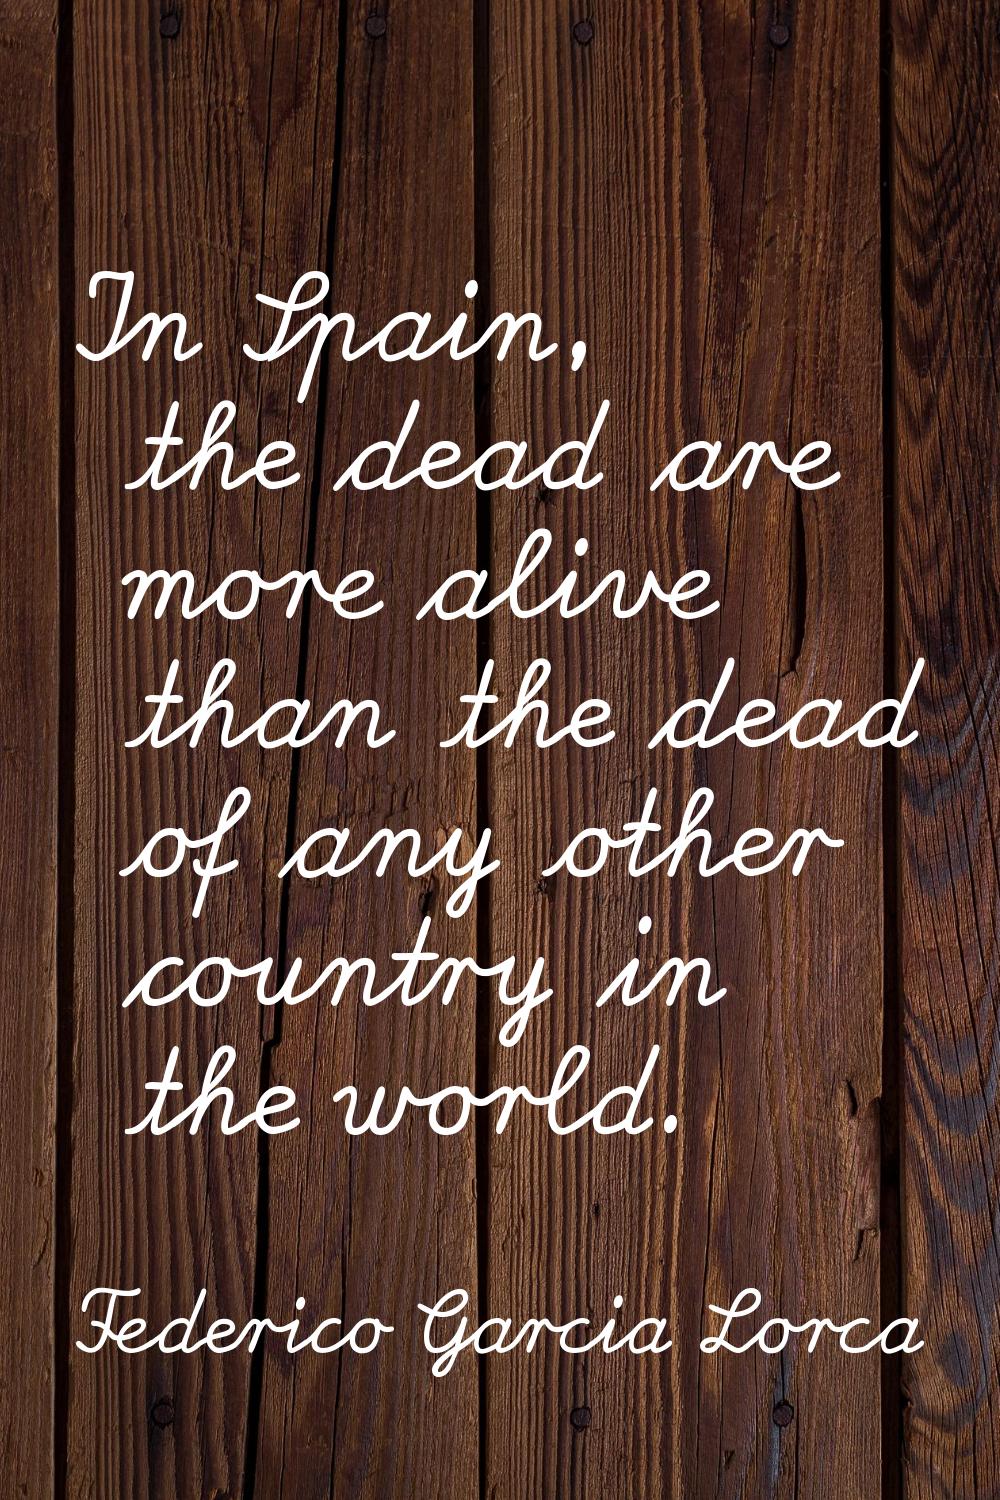 In Spain, the dead are more alive than the dead of any other country in the world.